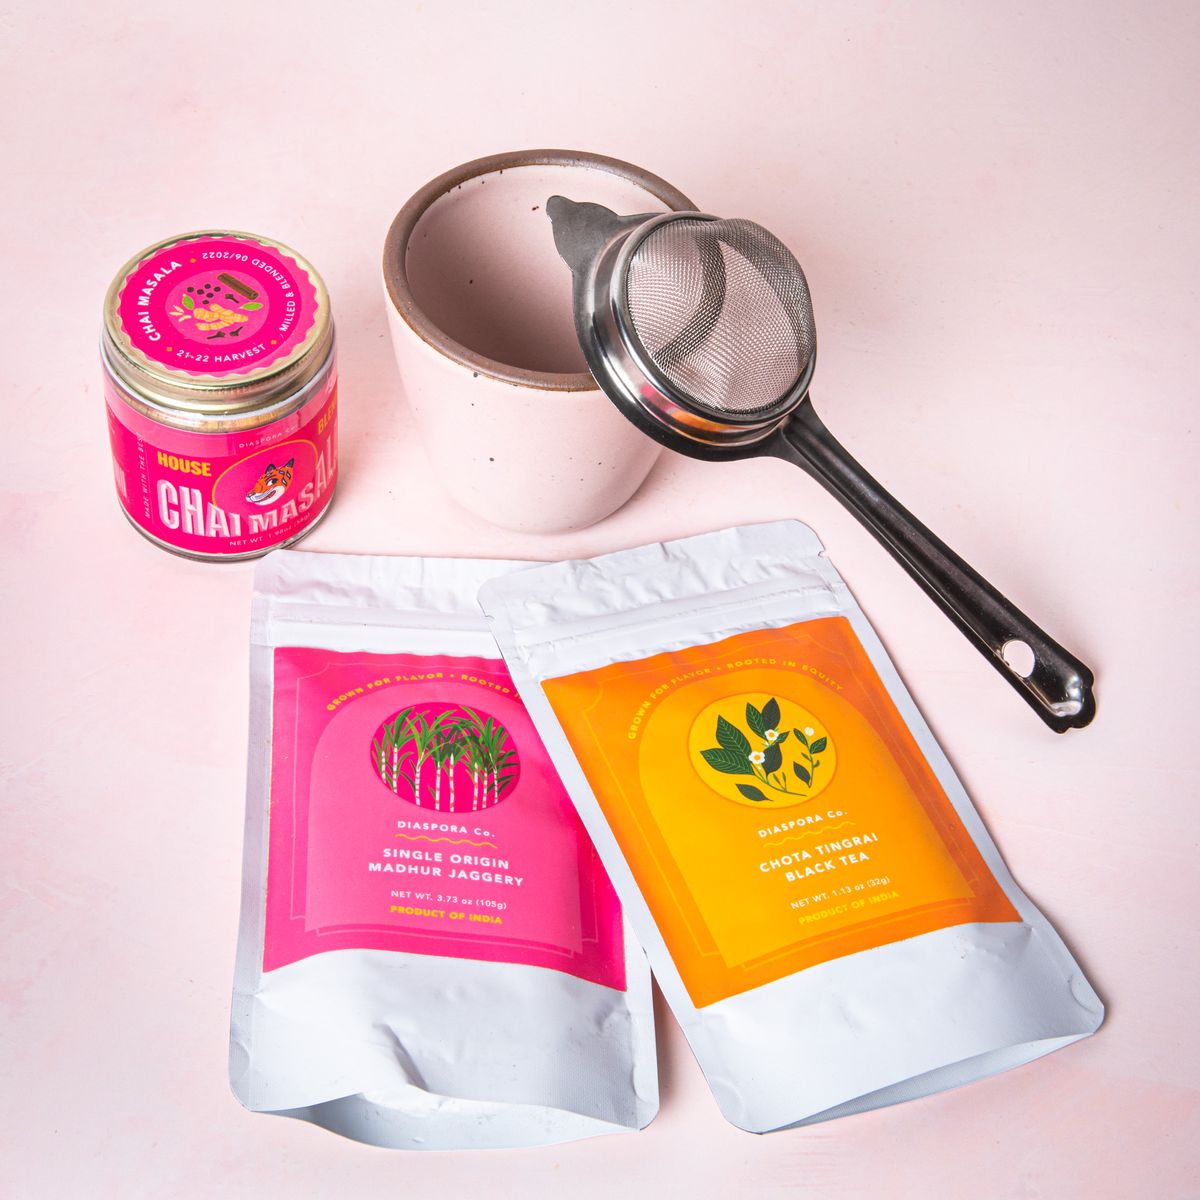 A chai bundle on a soft pink background featuring a soft light pink kulhad, a tea strainer, a pink jar of chai masala, and 2 packages of jaggery and black tea